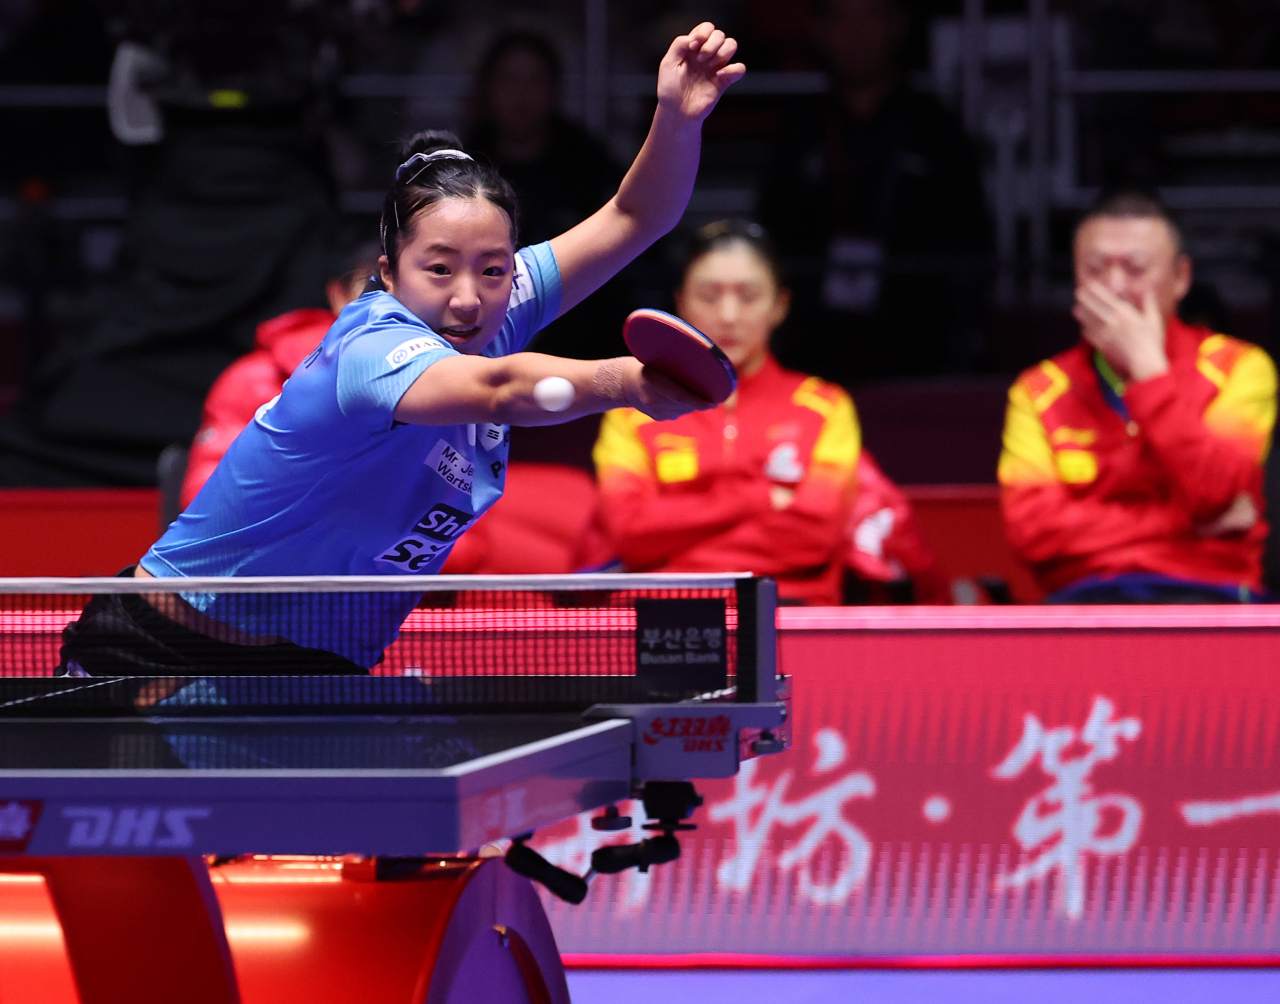 South Korean table tennis player Shin Yu-bin makes a serve against her Chinese rivals in the quarterfinals at the International Table Tennis Federation (ITTF) World Team Table Tennis Championships held in Busan, Thursday. (Yonhap)